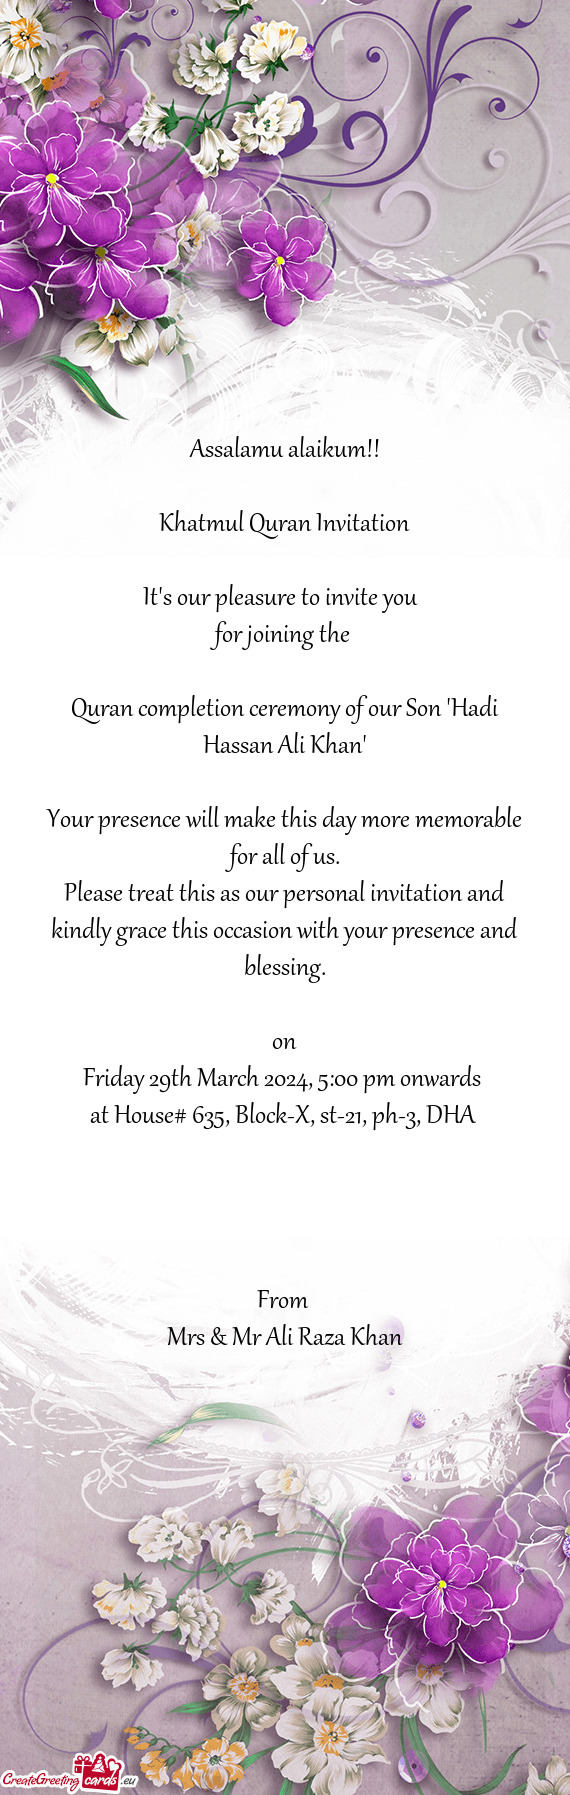 Quran completion ceremony of our Son "Hadi Hassan Ali Khan"